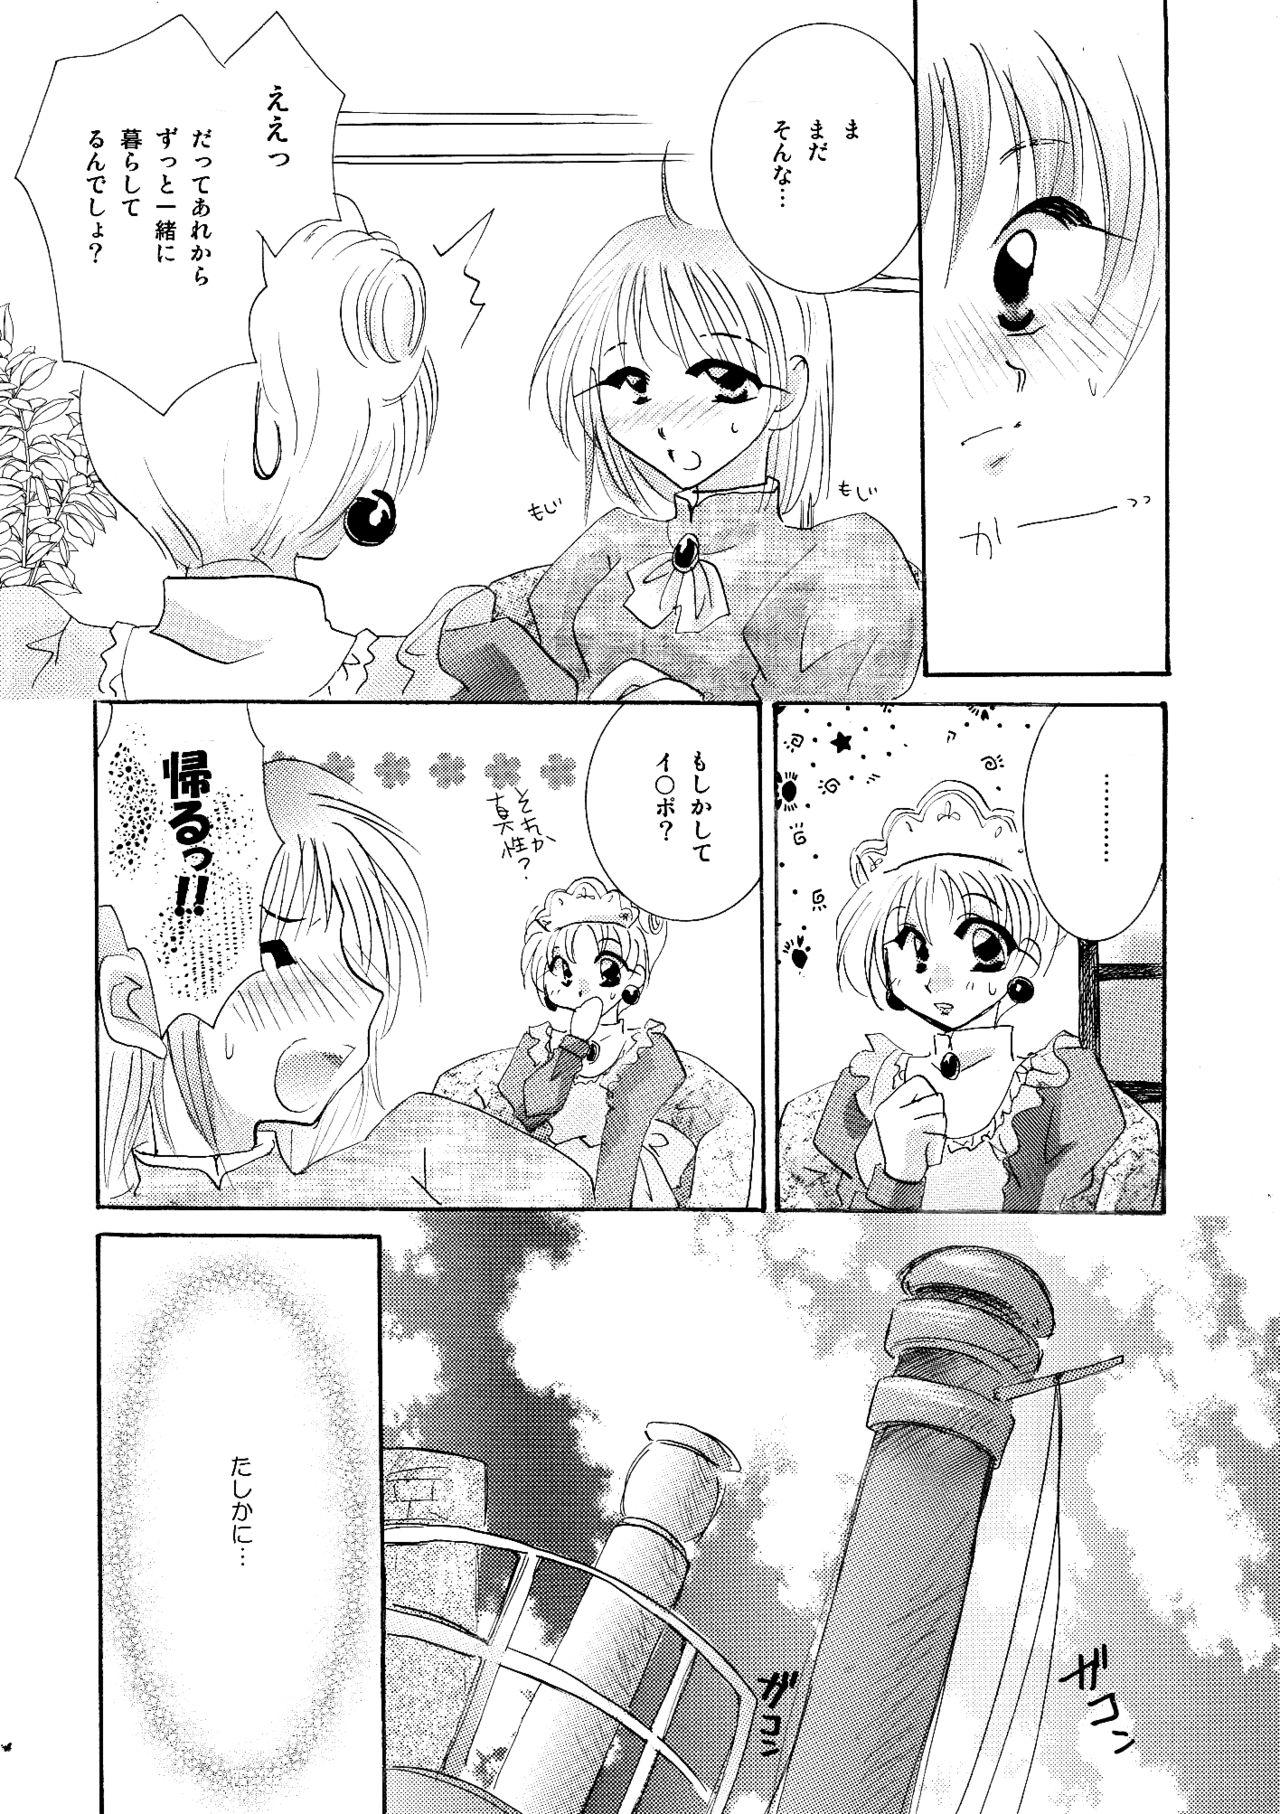 Cowgirl etc Movie ver. - Howls moving castle Vergon - Page 6